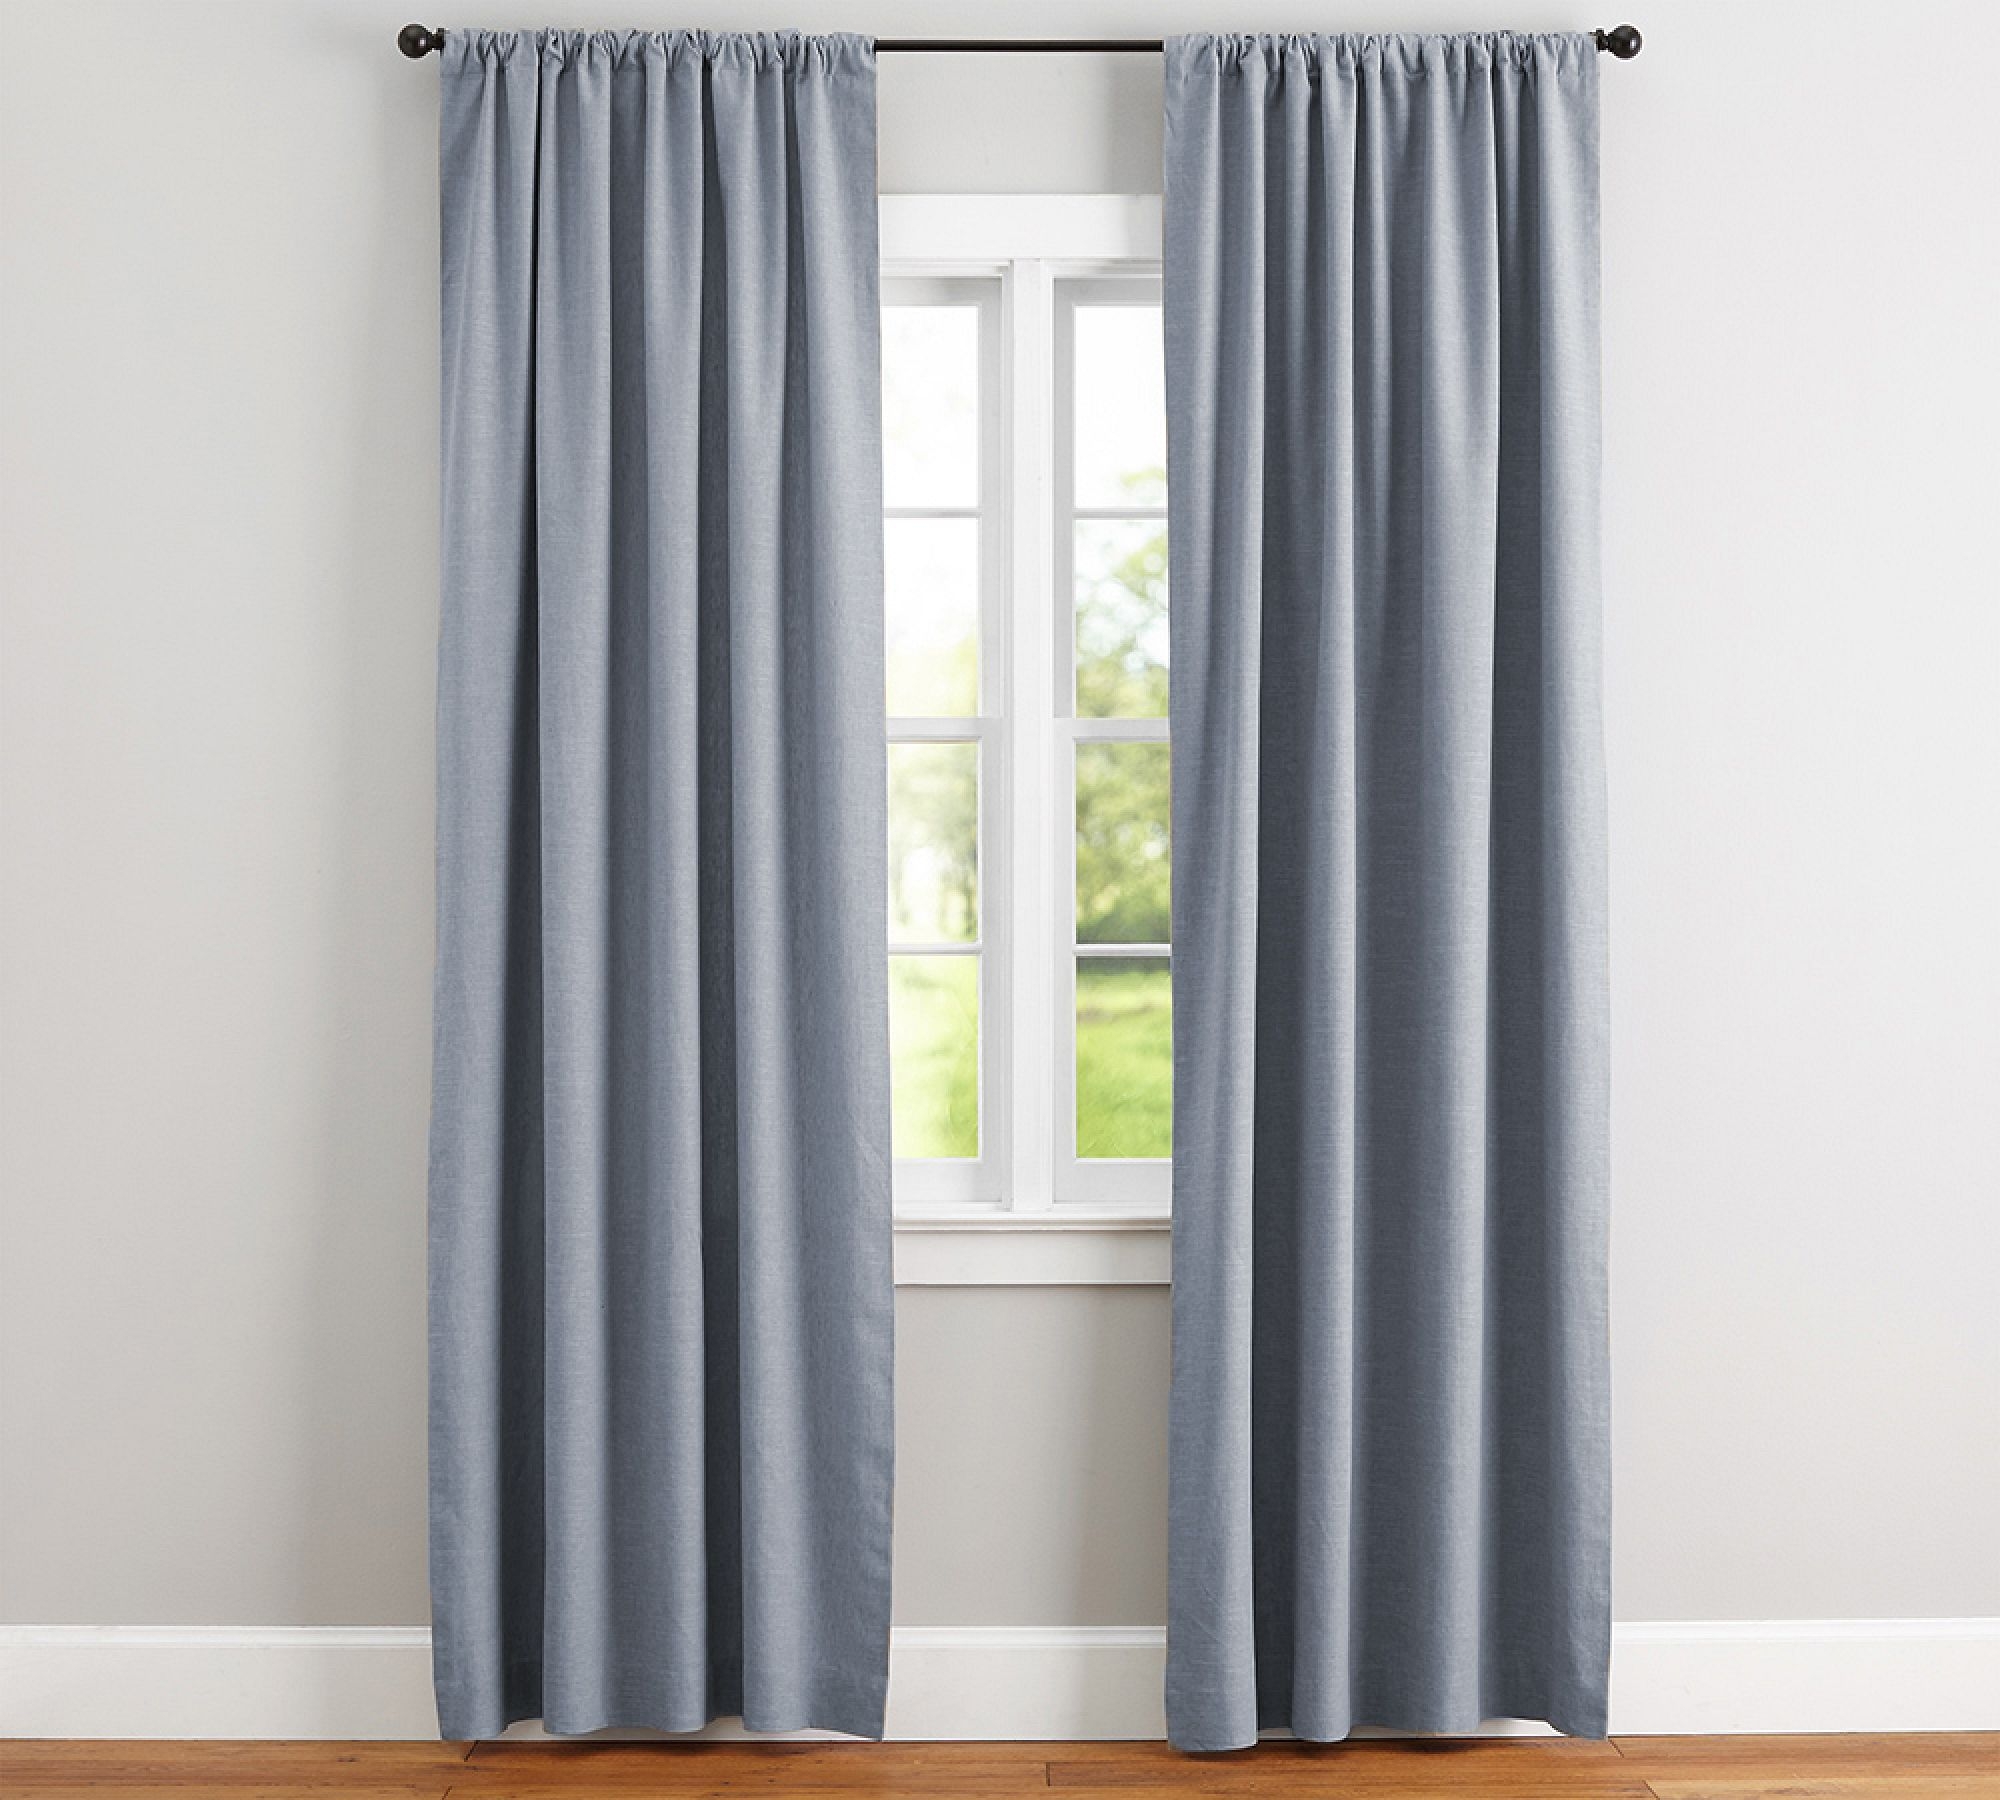 Emery Linen Curtain, 50 x 96", Mineral Blue - Image 1